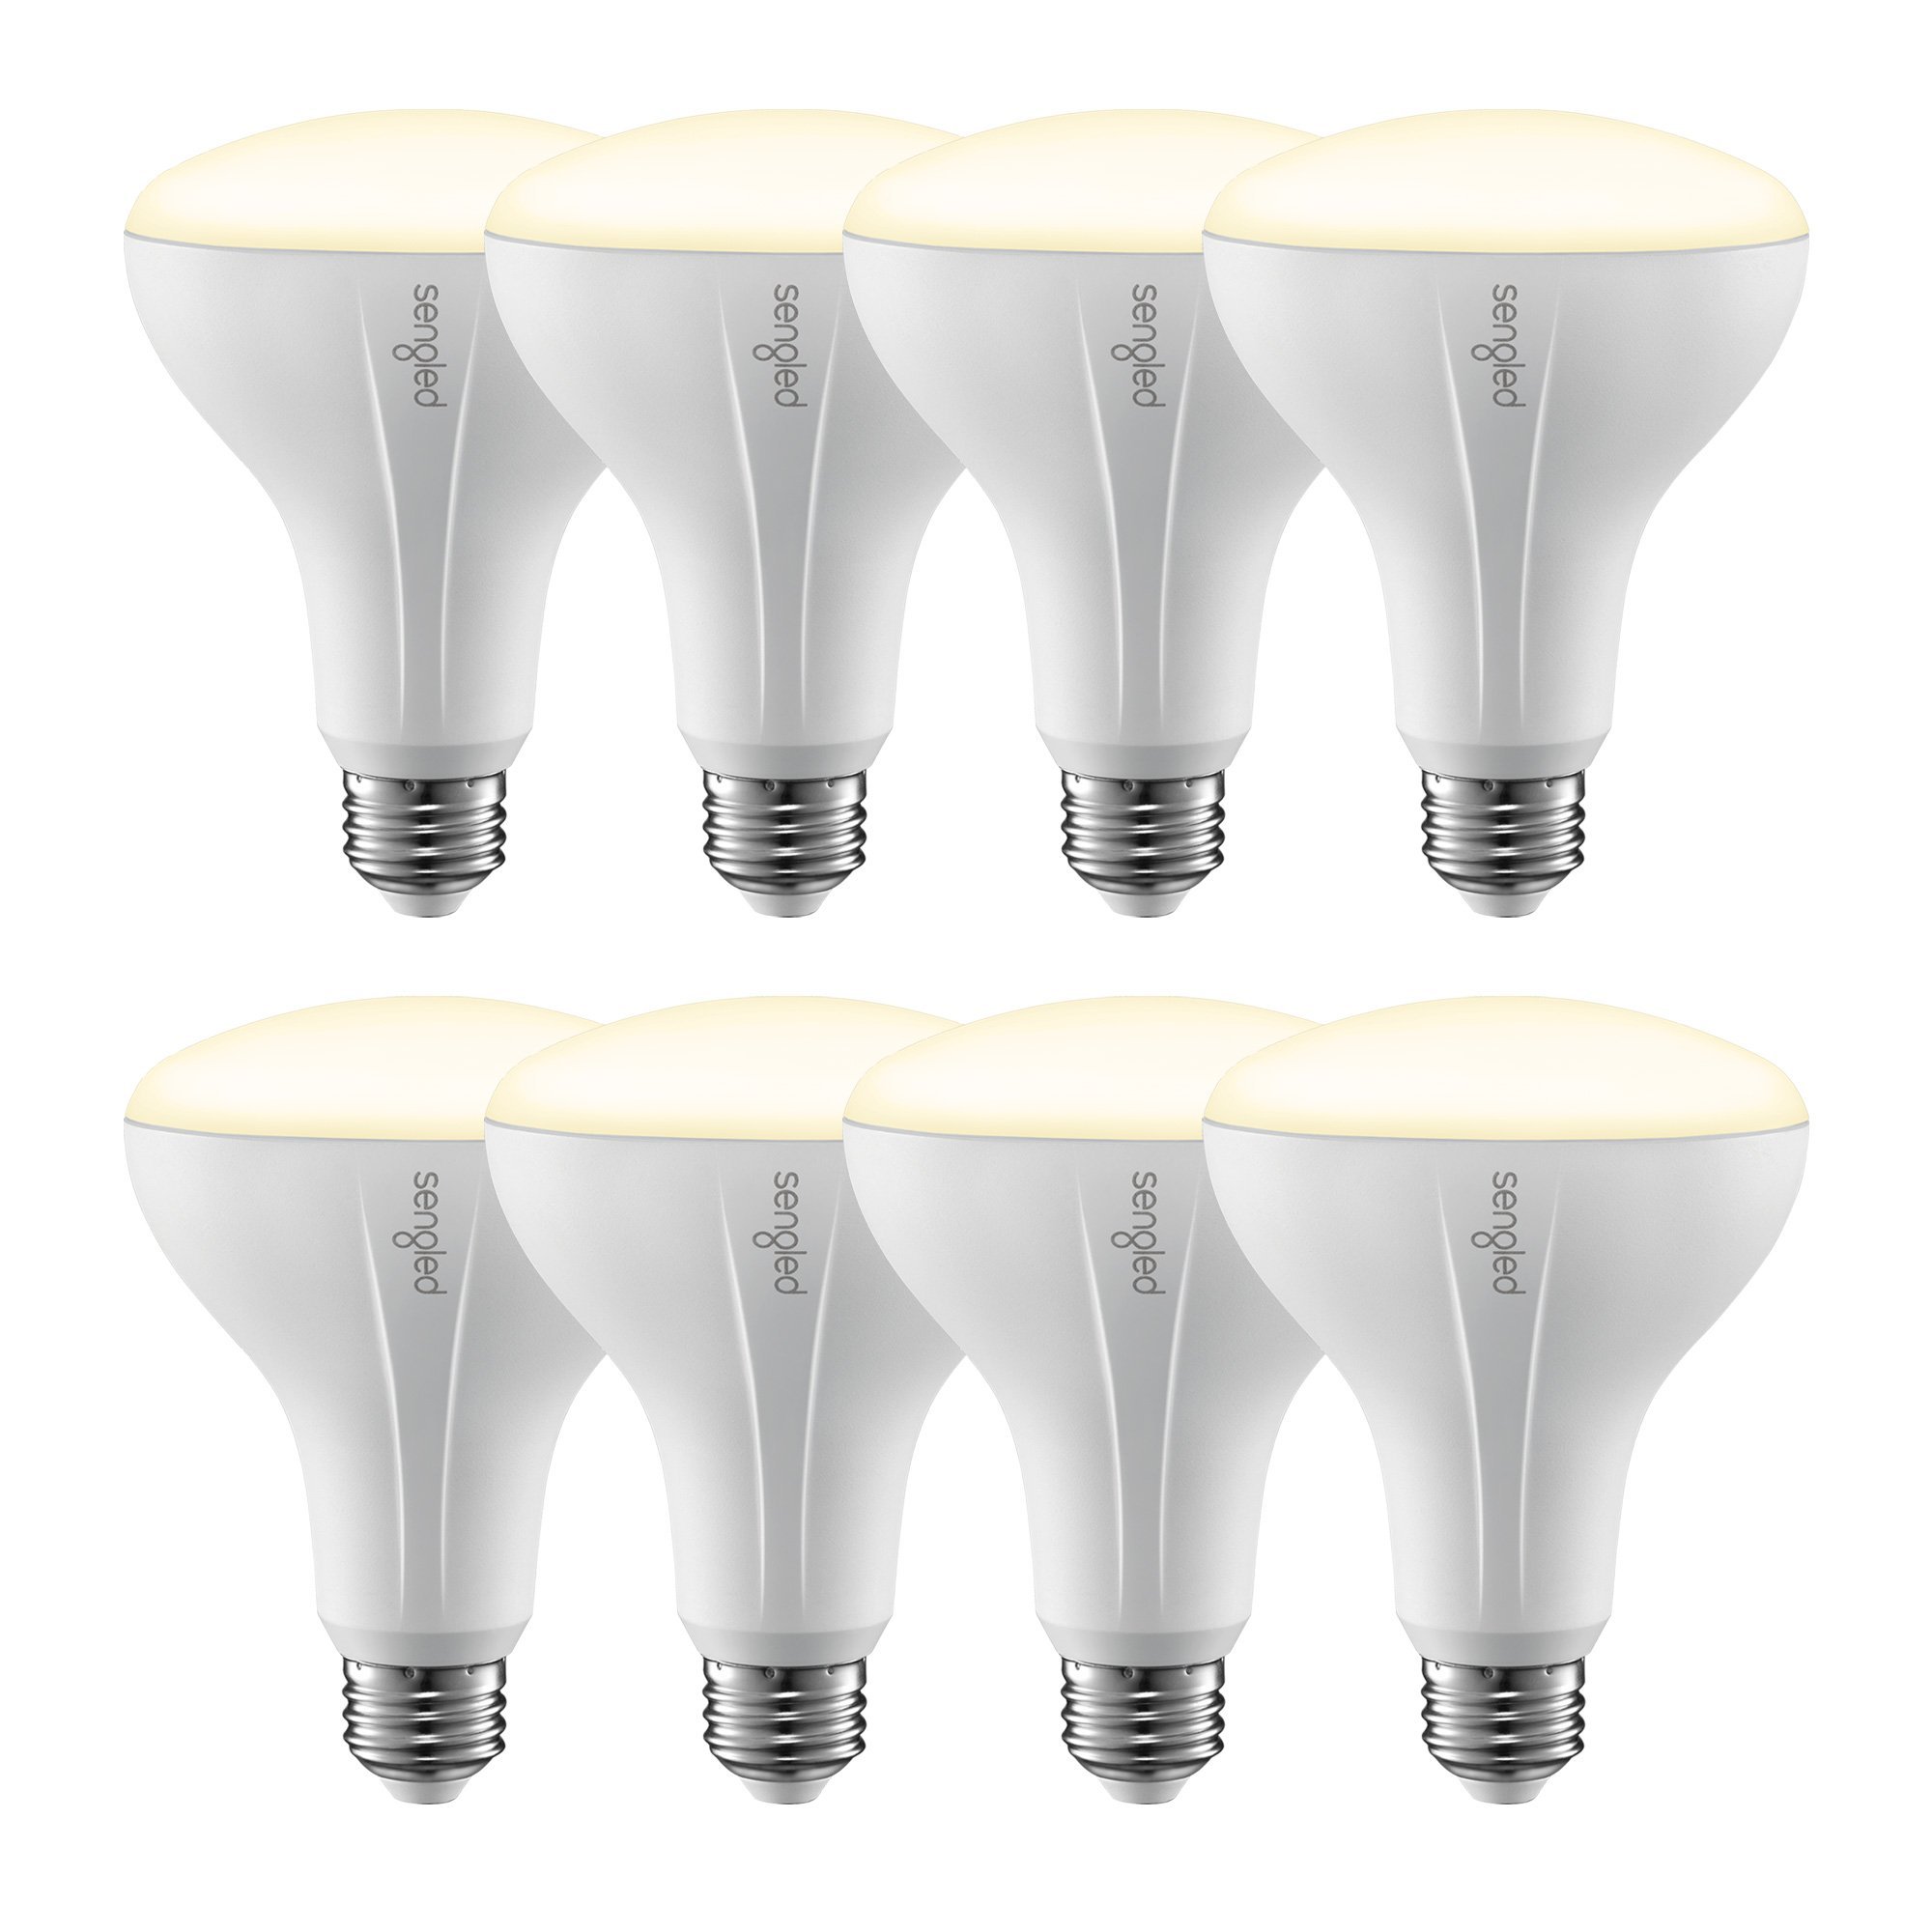 Sengled Smart Bulb, Zigbee Hub Required, Smart Light Bulb Works with Alexa, Google Home, SmartThings, Homekit and Siri, BR30 Dimmable Flood Light Bulb for Cans, Soft White 2700K, 650 LM, 9W, 8 Pack